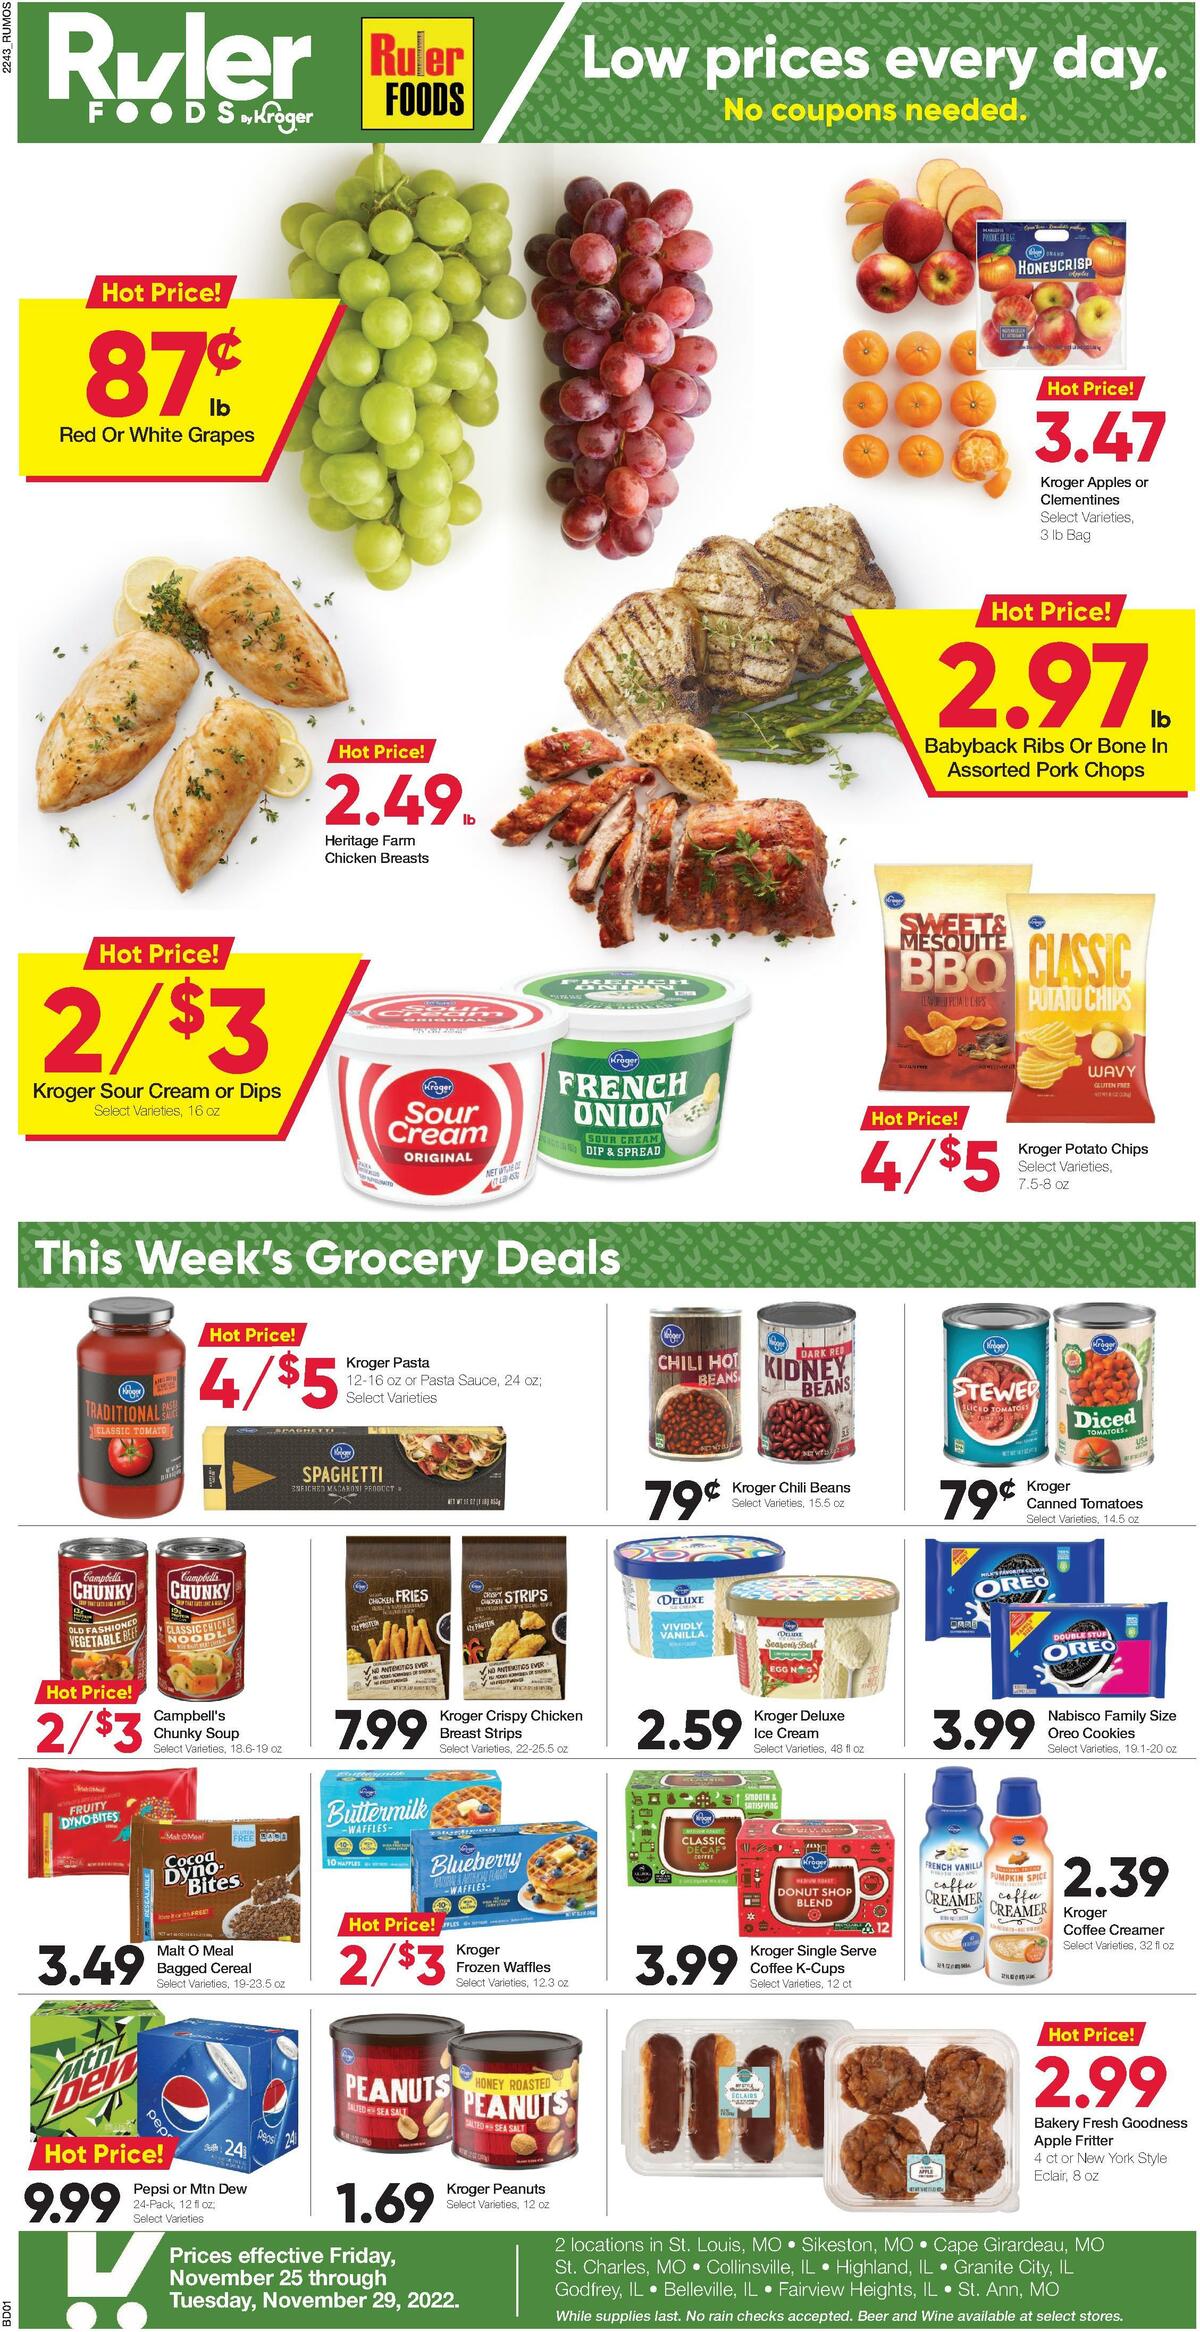 Ruler Foods Weekly Ad from November 25